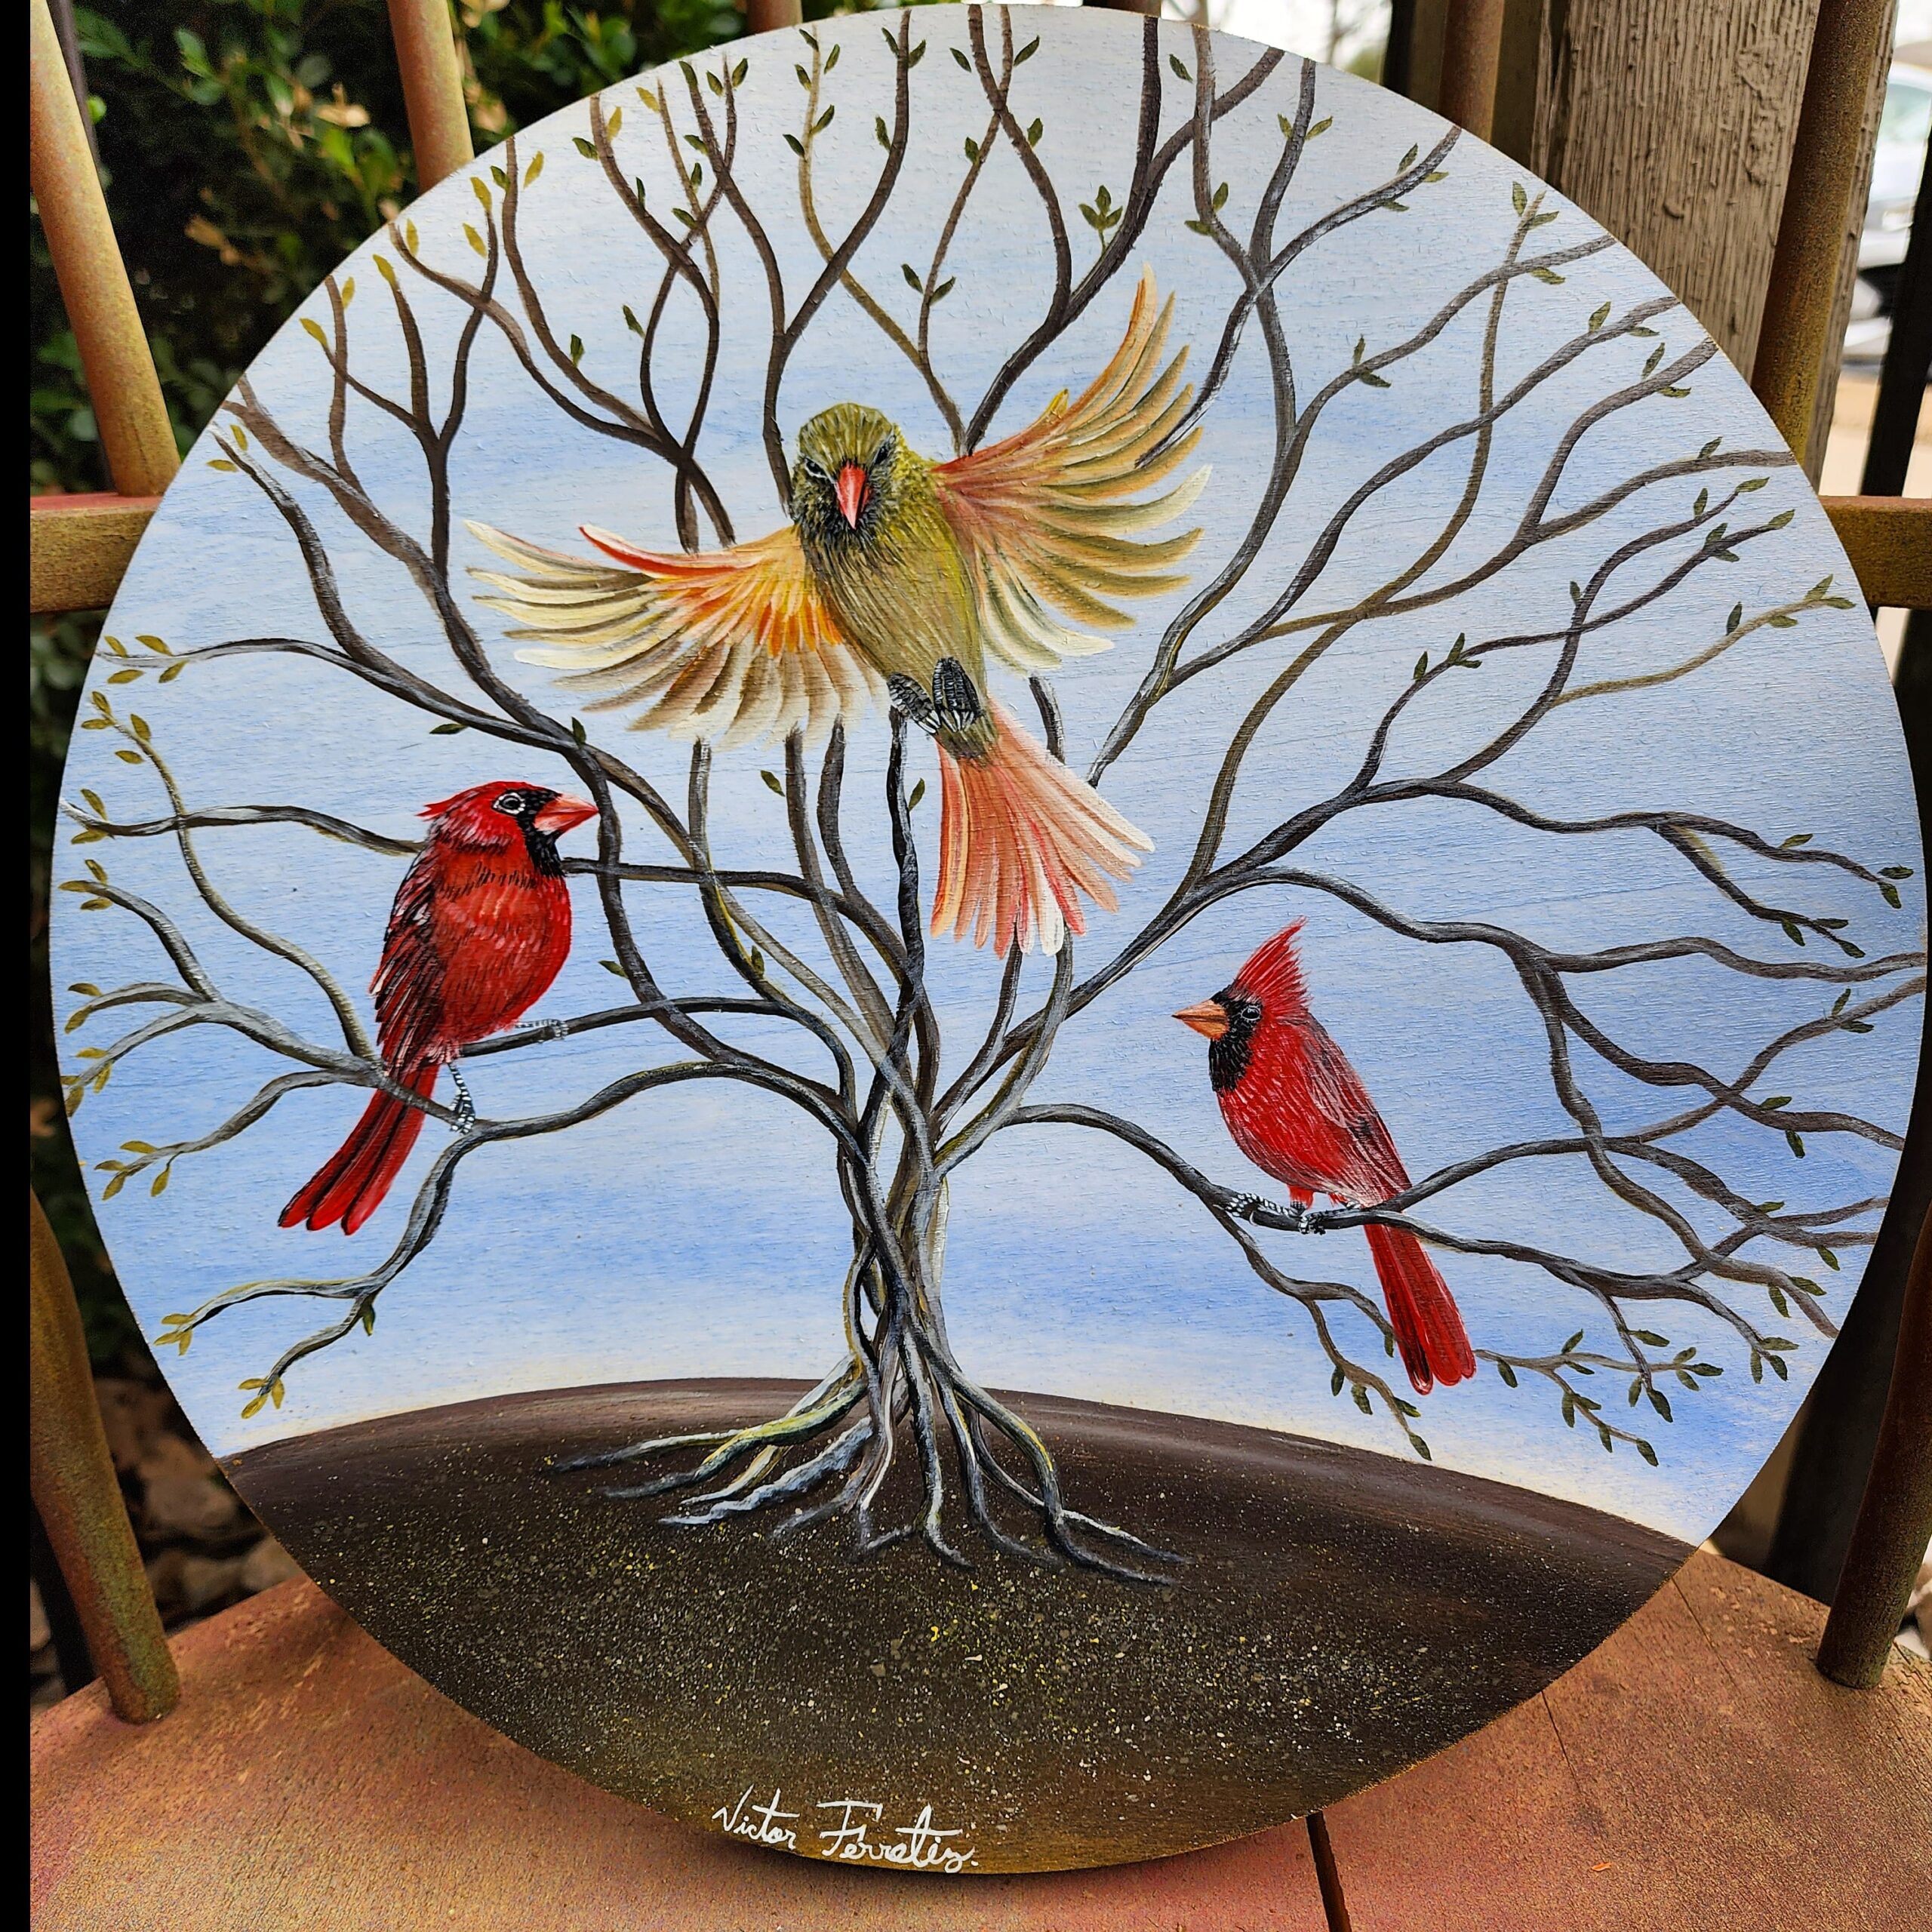 It's said that cardinals appear when angels are near and that the cardinal represents loved ones who have passed away. They are seen as messengers from Heaven who deliver words of love and comfort during difficult times. If you see a bright red cardinal, it means that you are being blessed with good luck and fortune.